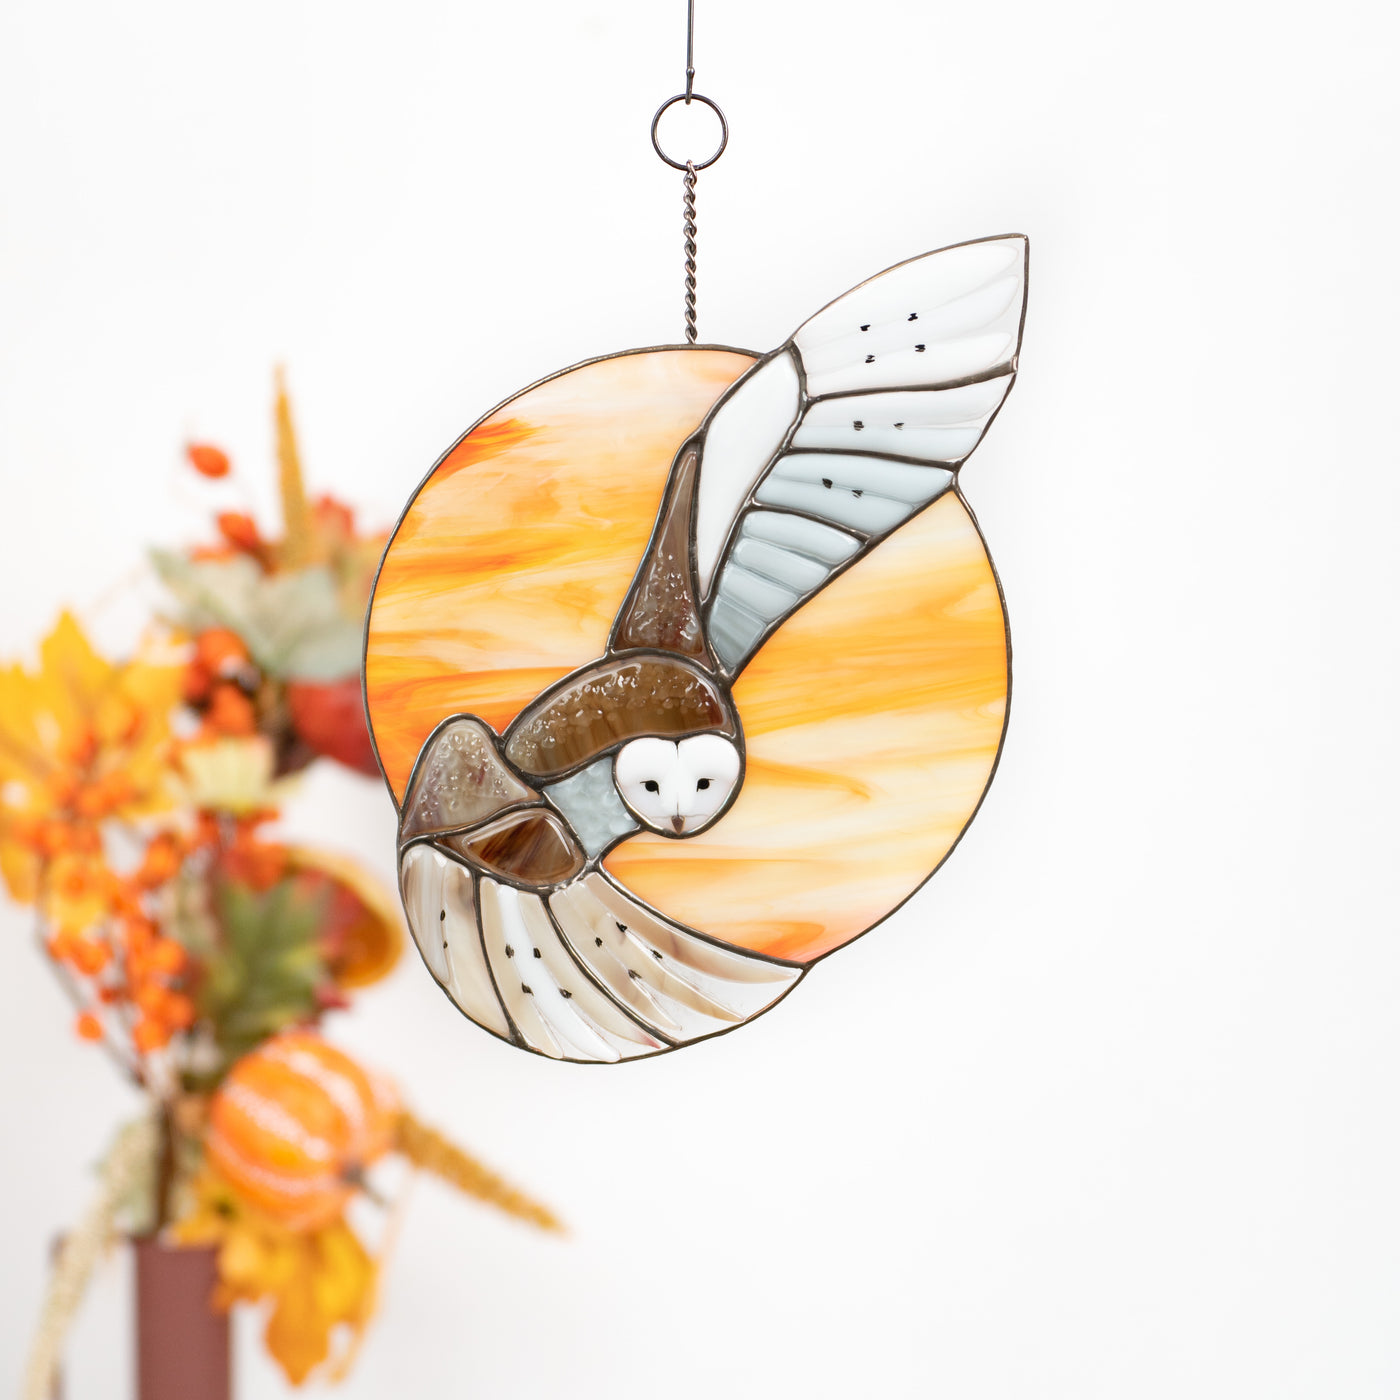 Fused barn owl on orange round background window panel of stained glass